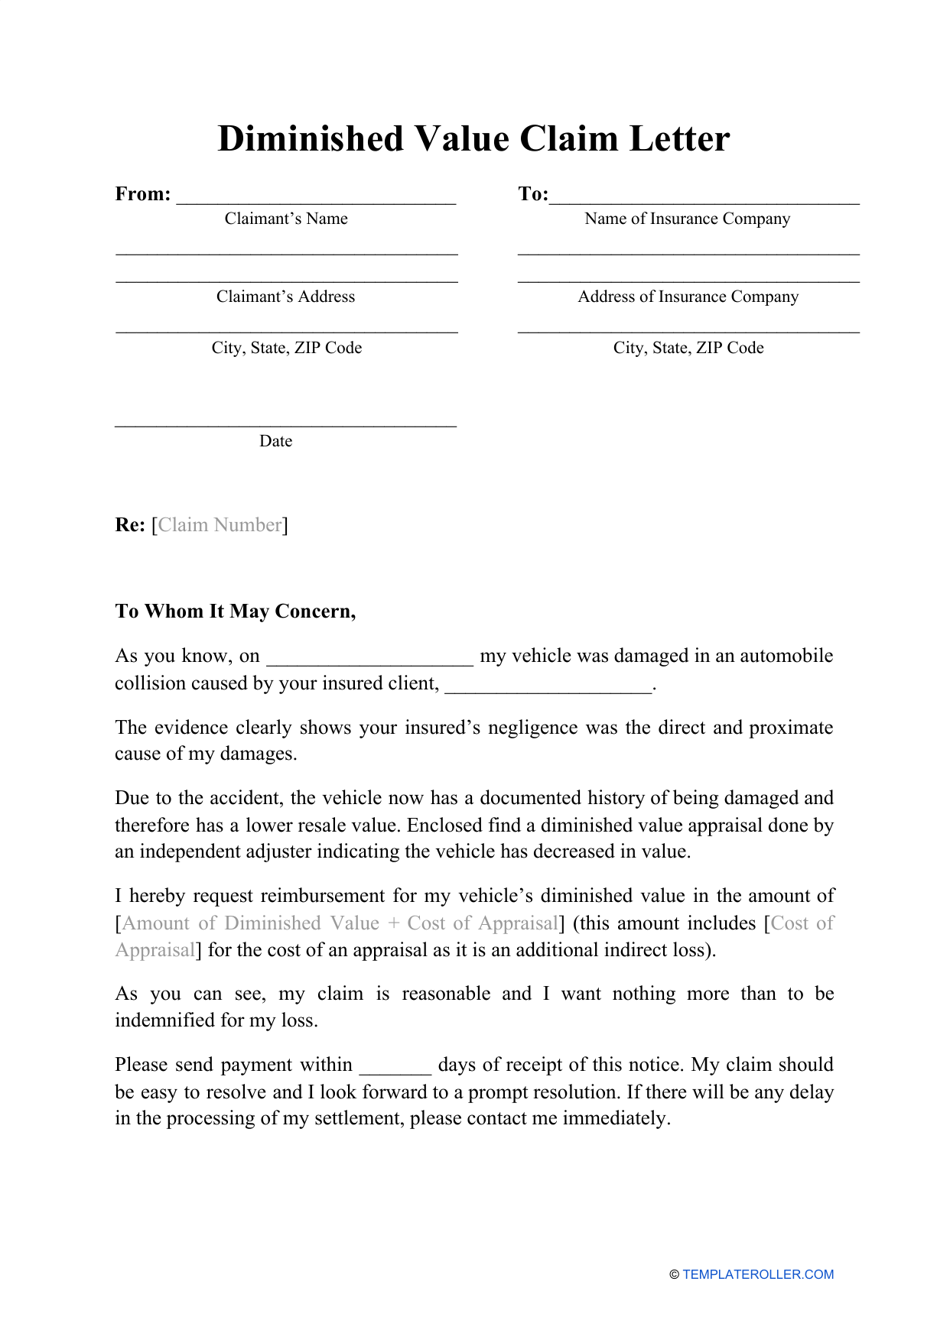 Diminished Value Claim Letter Template Download Printable PDF With Valuation Letter Template